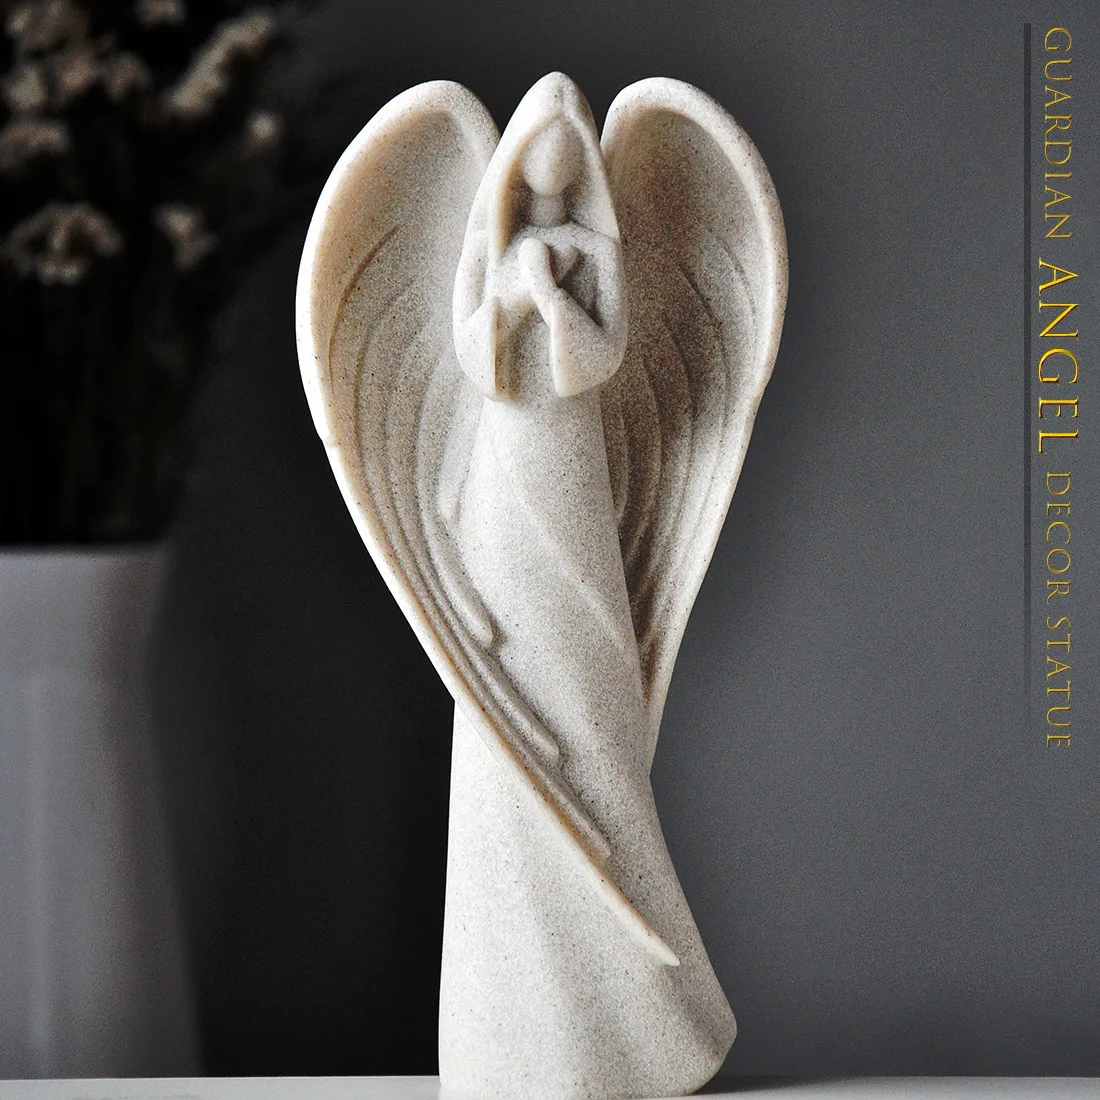 

Resin Creative Guardian Angel Statue Home Decor Crafts Room Decoration Objects Study Vintage Girls Lady Ornament Figurines